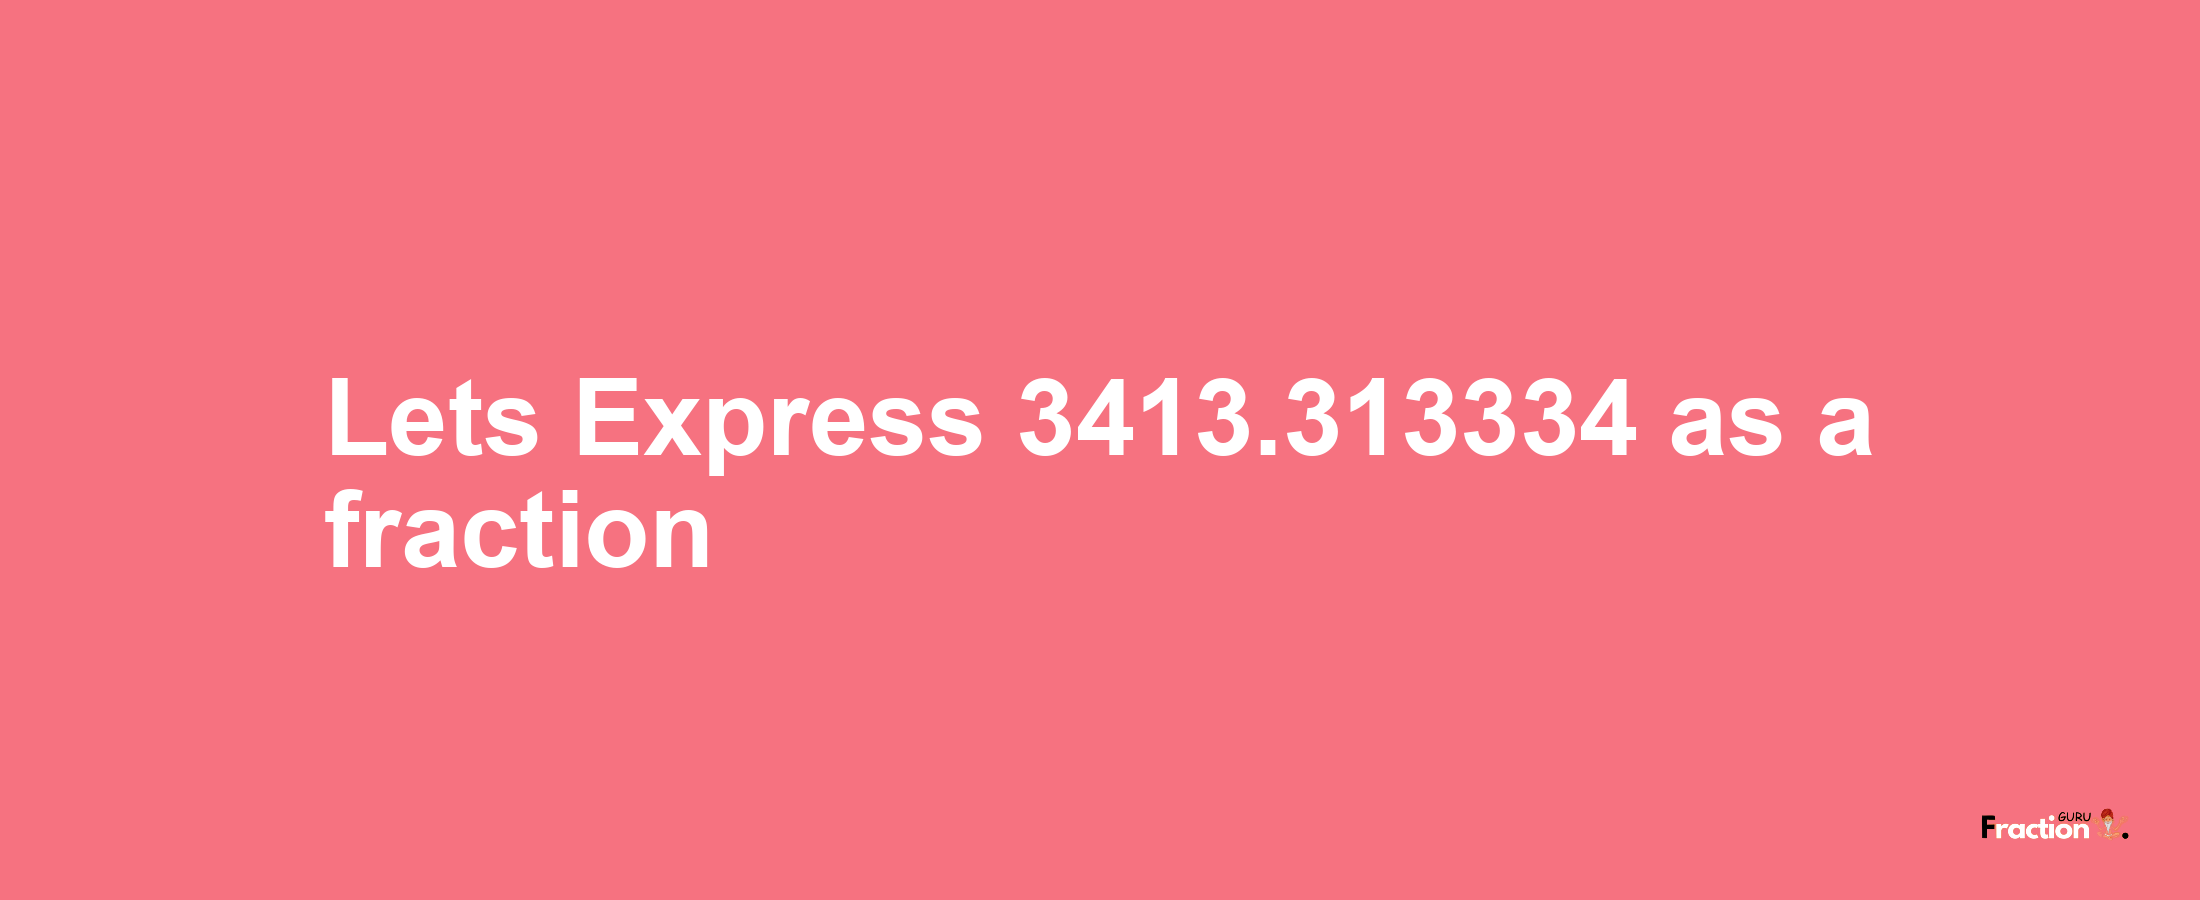 Lets Express 3413.313334 as afraction